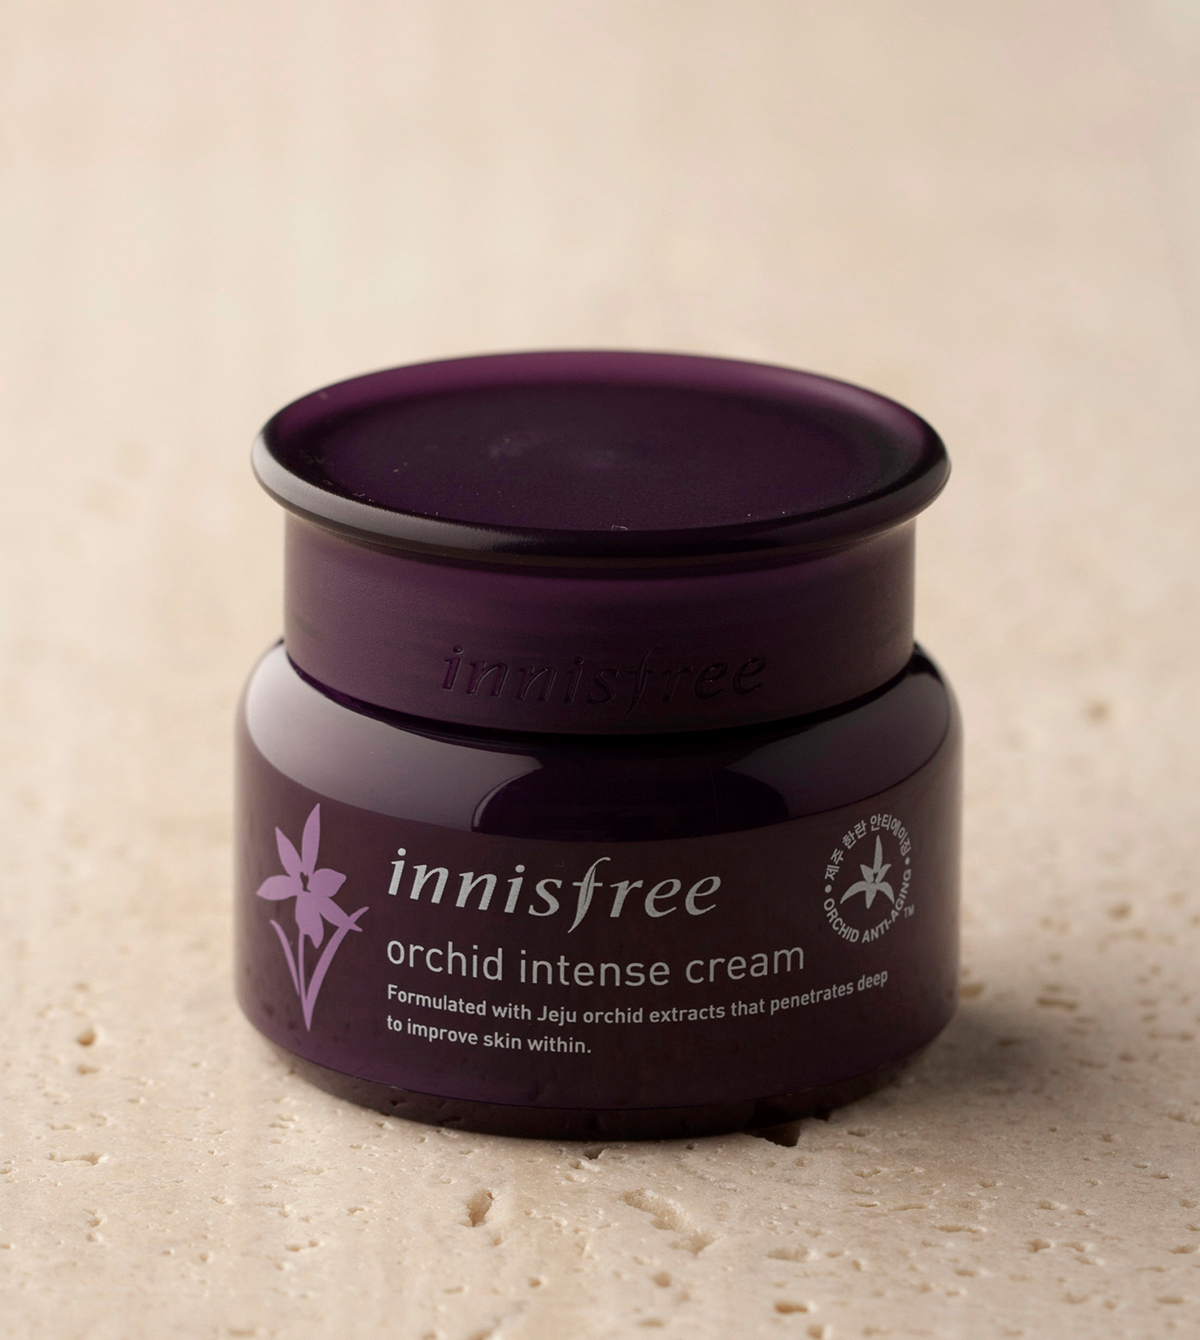 Innisfree Orchid Intense Cream - Innisfree Skin Care - Top 10 Moisturizers from Innisfree India to Try this Season